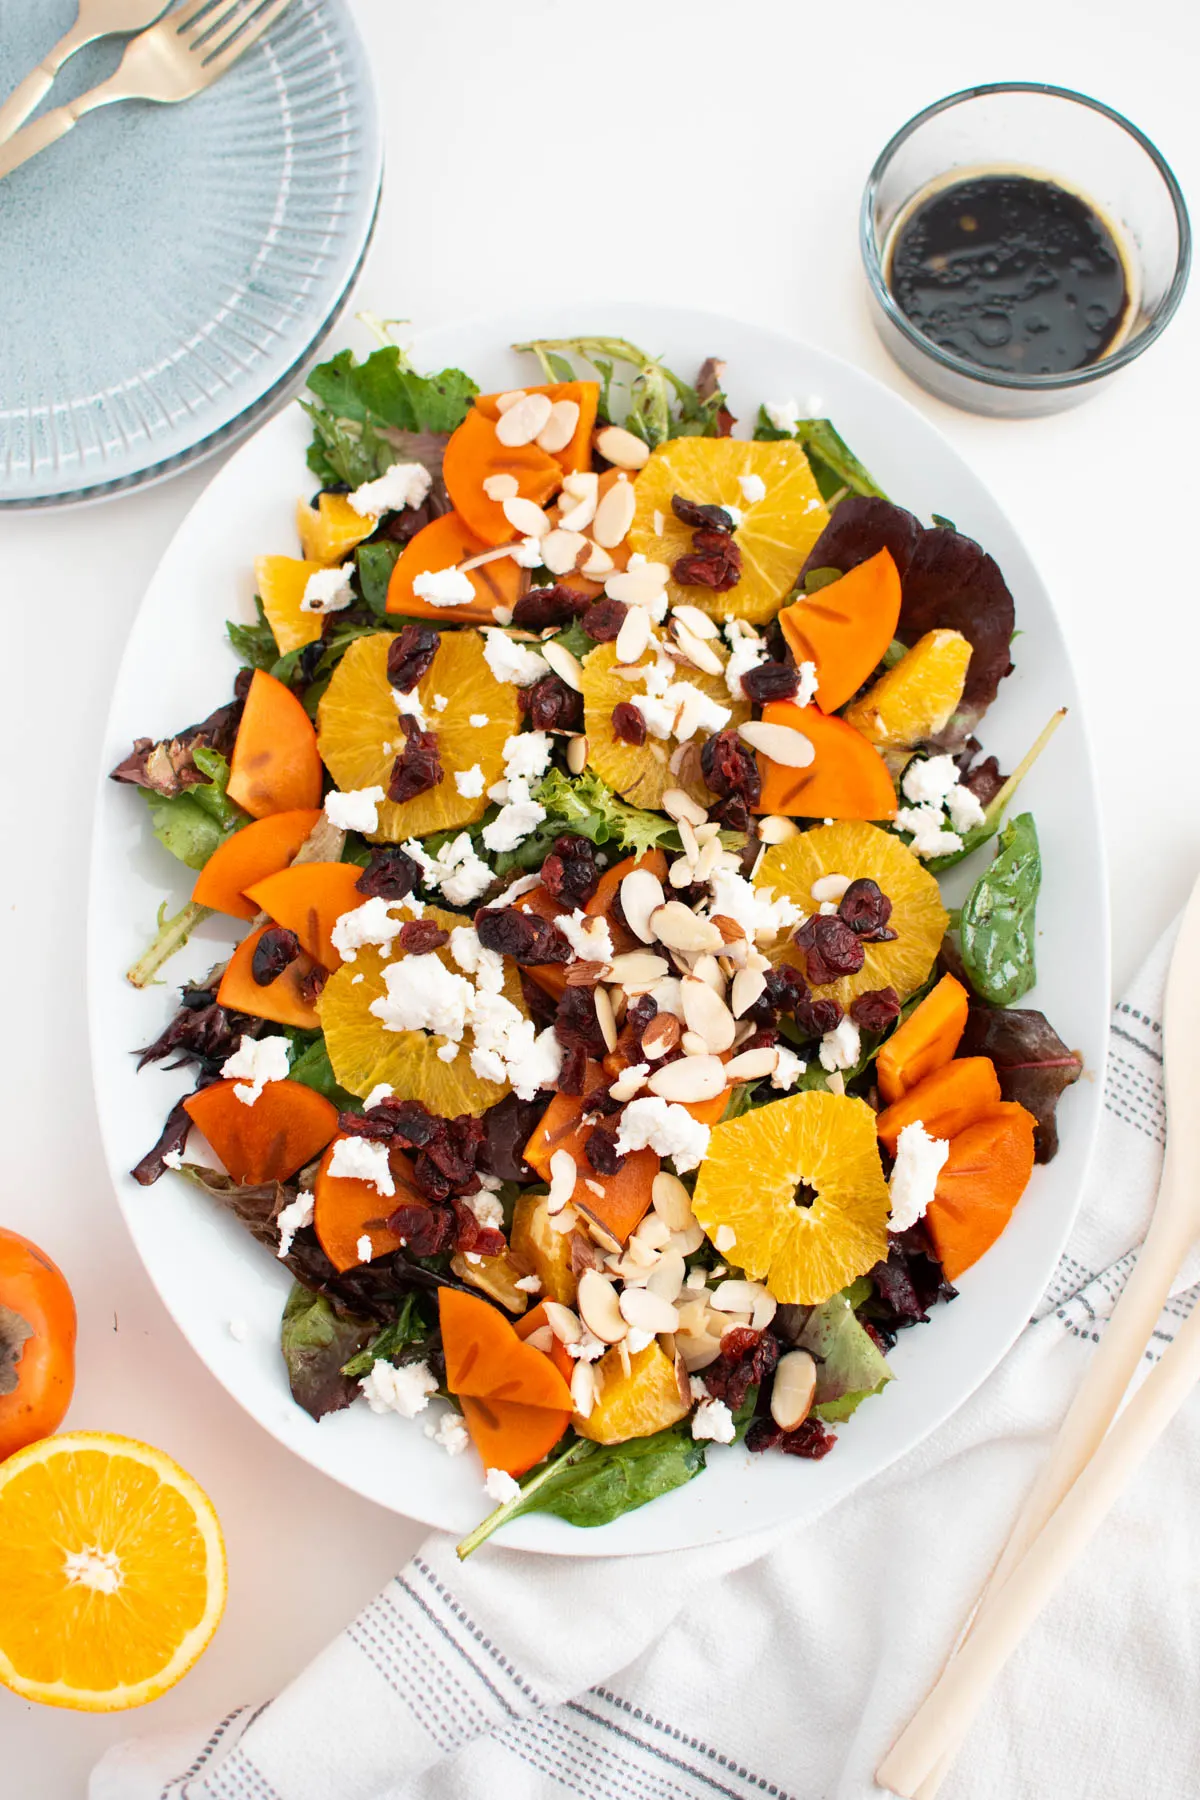 Persimmon salad with oranges, almonds, and cranberries on white platter with plates and fresh ingredients nearby.